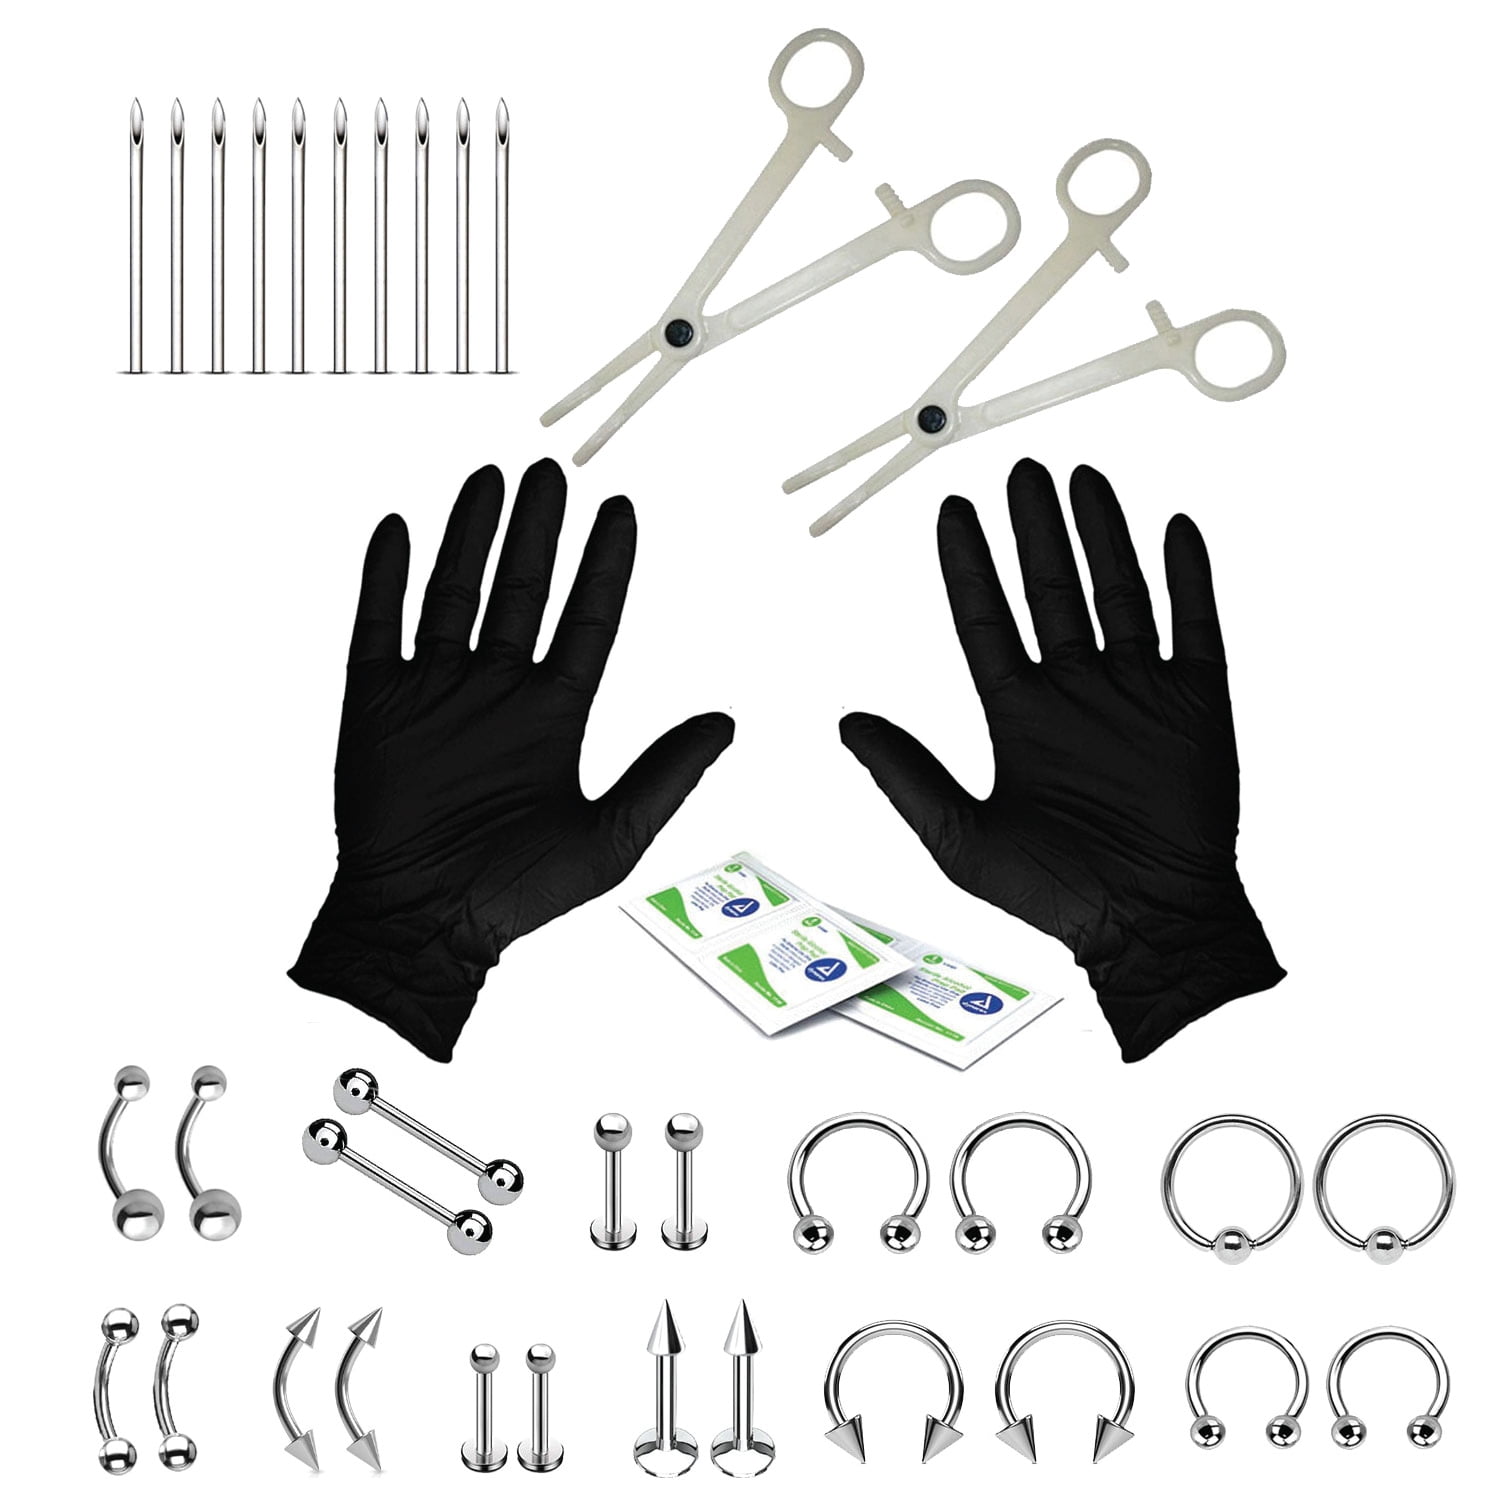 Body Piercing Kit 114 PCS Stainless Steel Industrial Piercing Kit with 14G 16G 18G Piercing Needles Clamps for Belly Button Lip Tongue Nose Septum Ear Cartilage Body All Professional Piercings